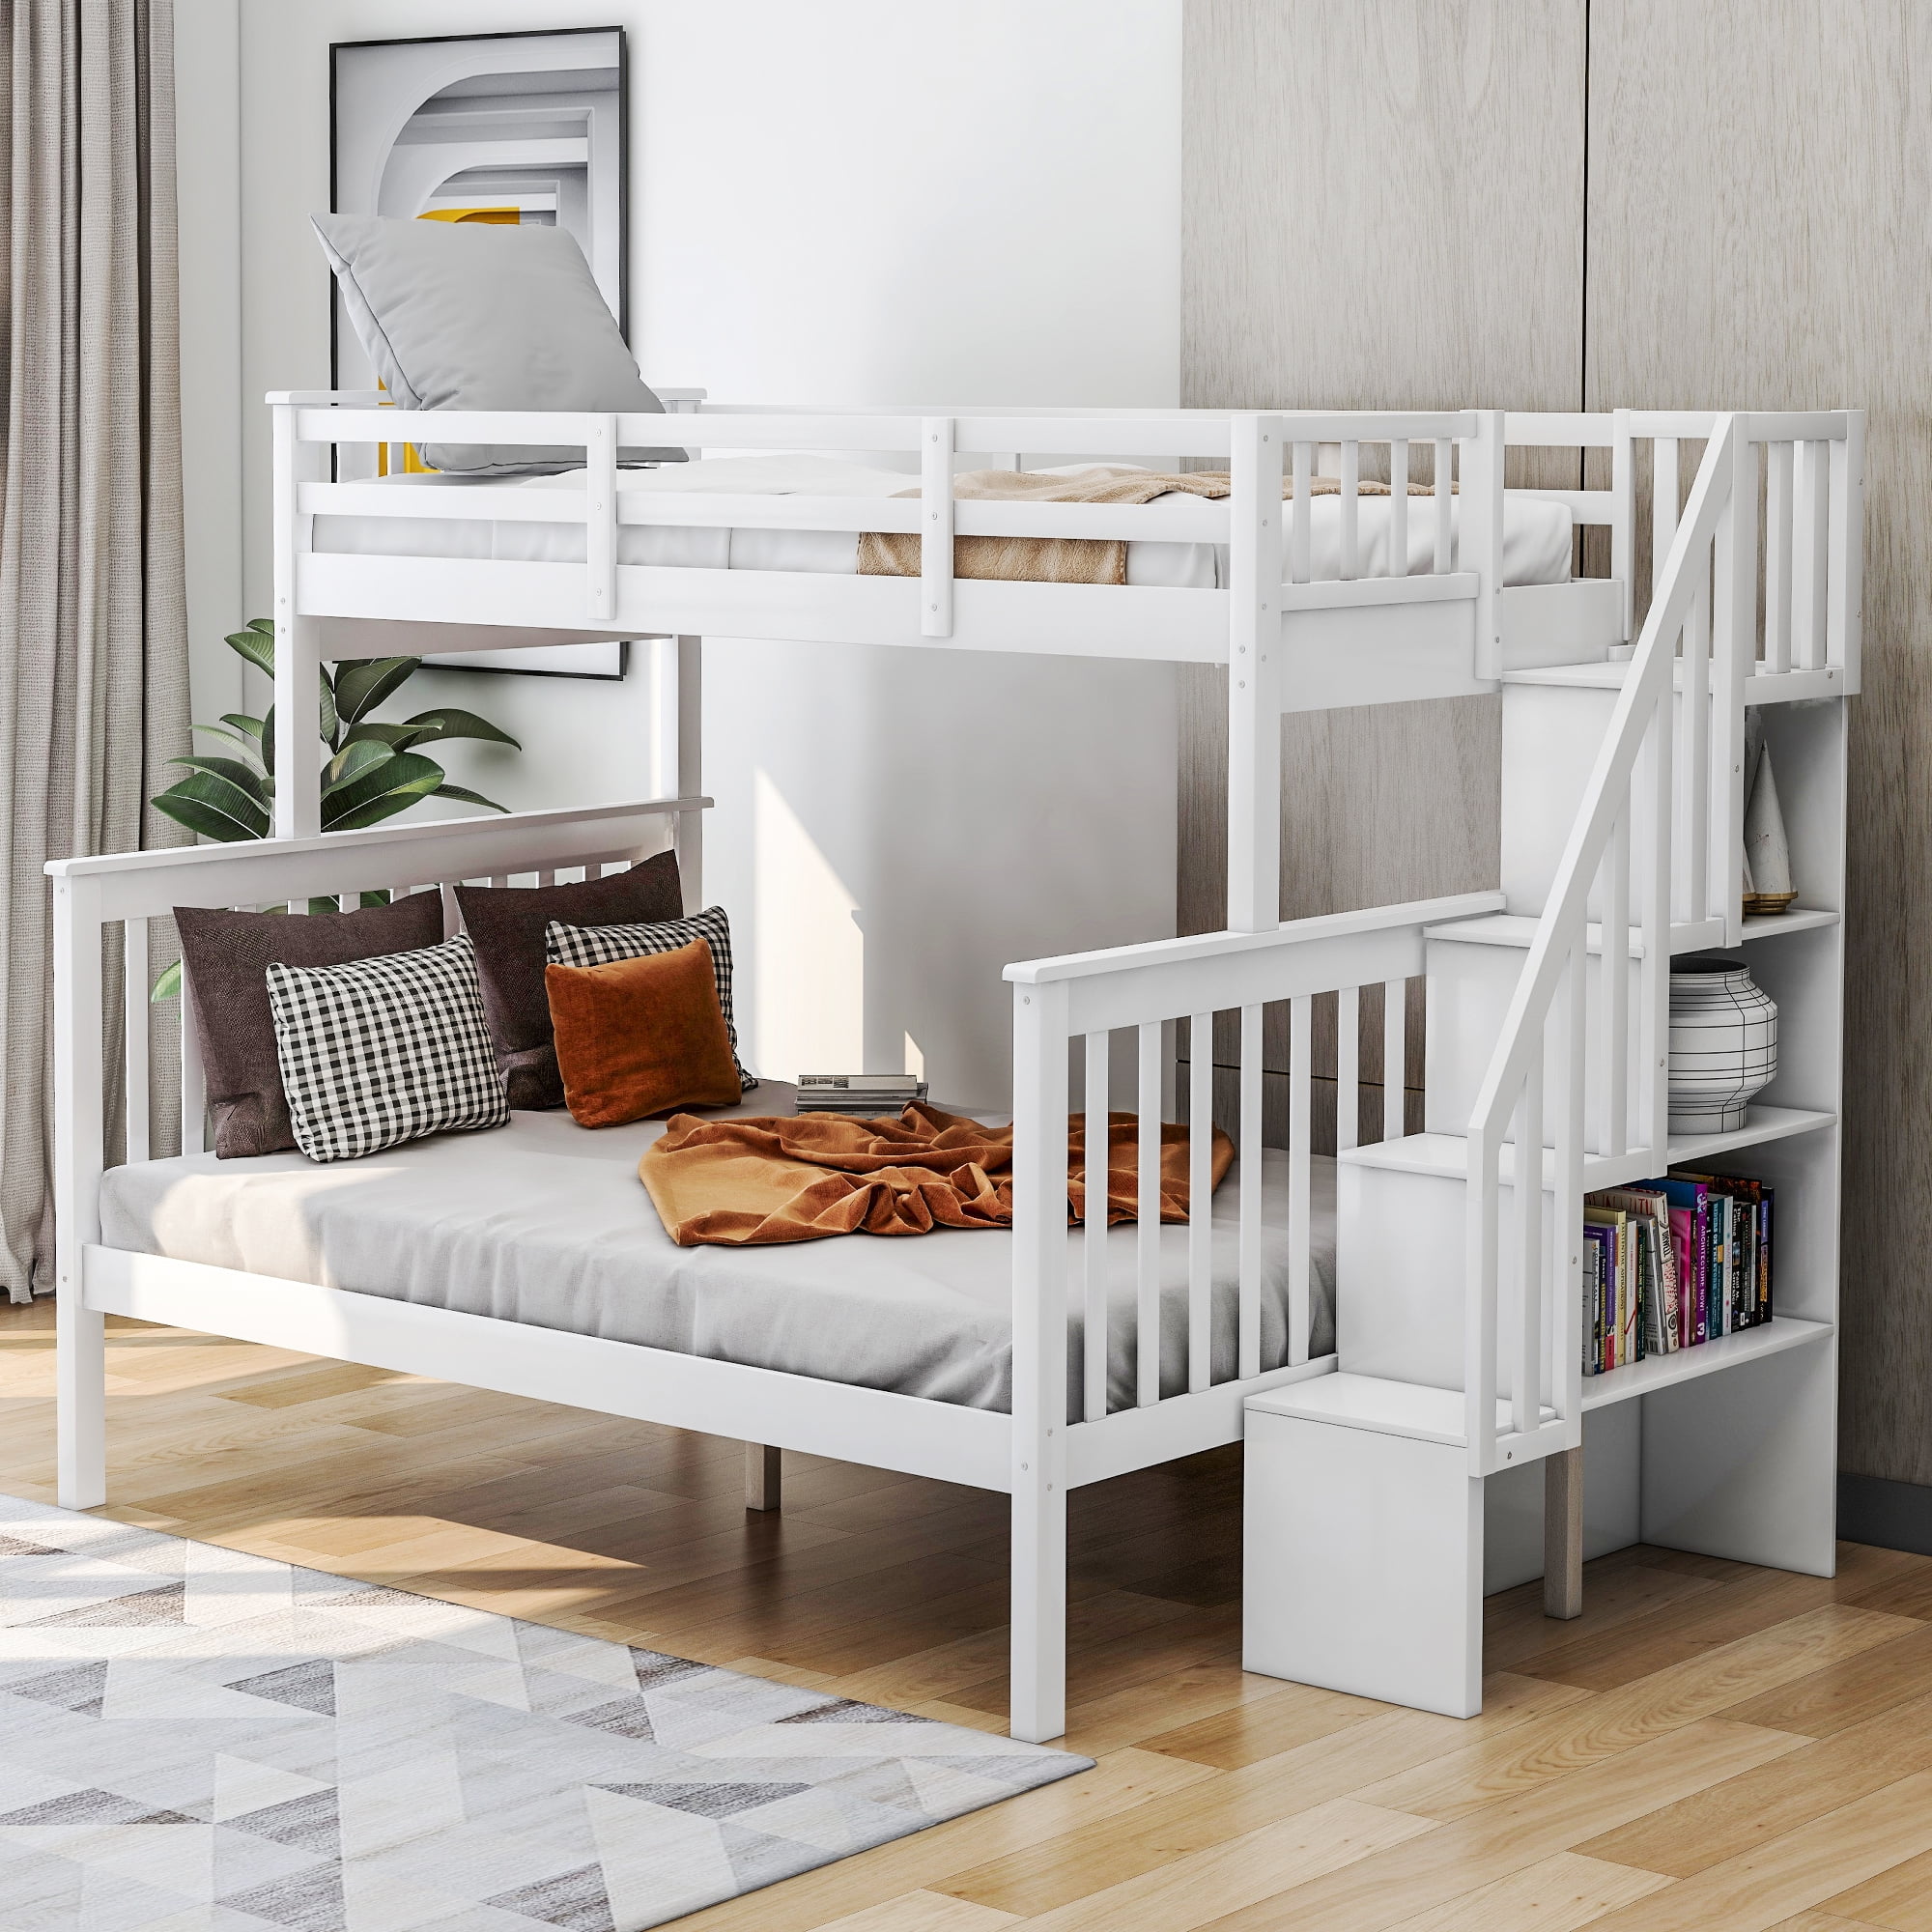 Kids Bunk Beds For Boys Girls Twin, Are Bunk Beds Safe For 5 Year Olds